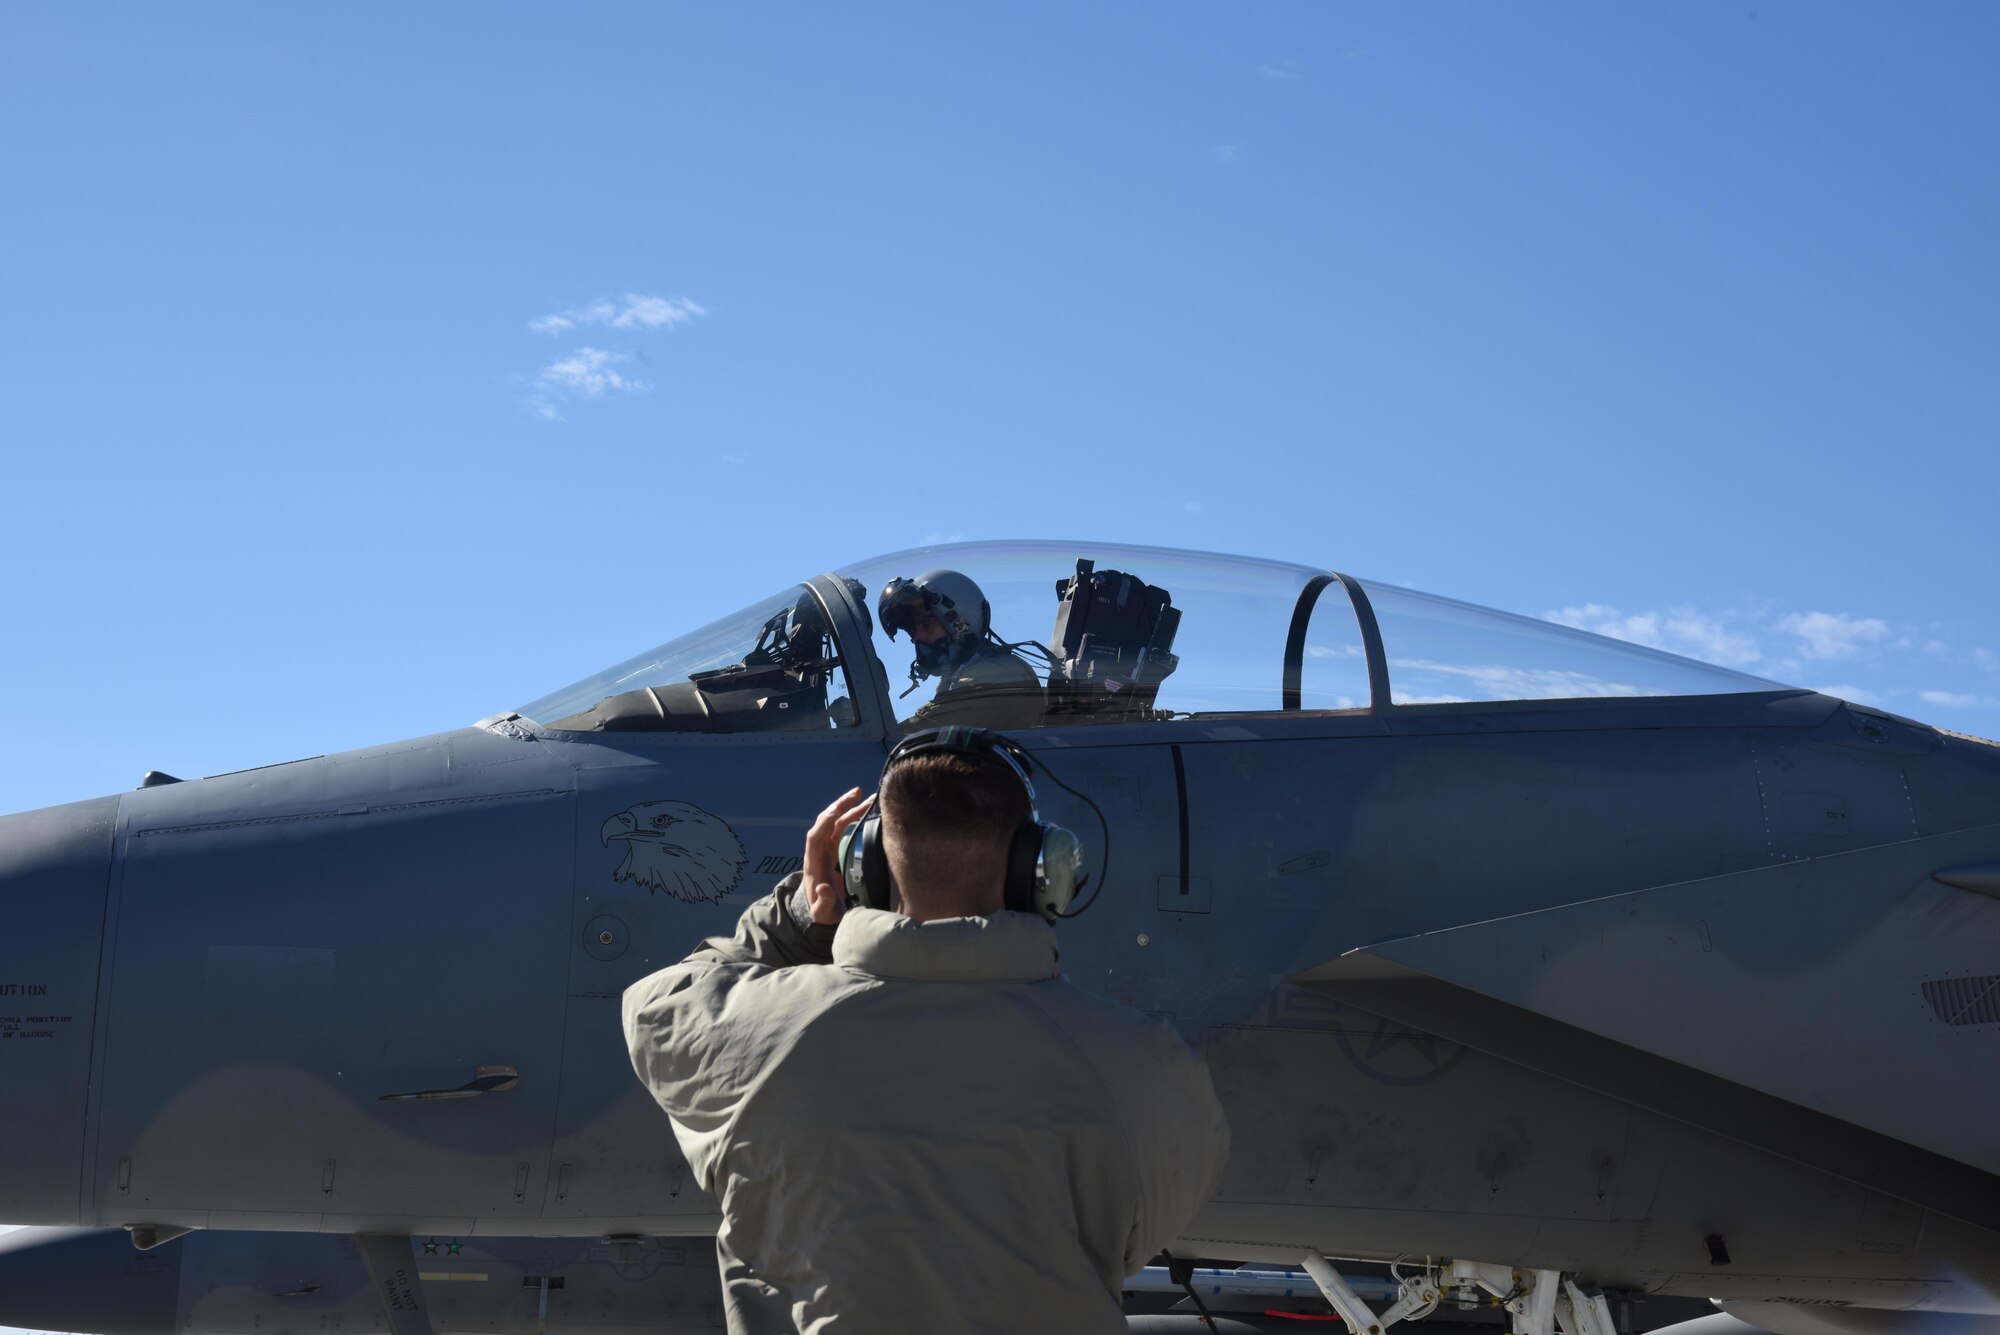 A 493rd Fighter Squadron pilot from the 48th Fighter Wing, Royal Air Force Lakenheath, England, communicates with a maintenance Airman at Rovaniemi Air Base, Finland, May 25, before taking off in support of Arctic Challenge 2017. The U.S. participants in ACE 17 represent America's forward presence, postured alongside our proven, essential NATO allies and partners. U.S. Air Force photo/Airman 1st Class Abby L. Finkel)